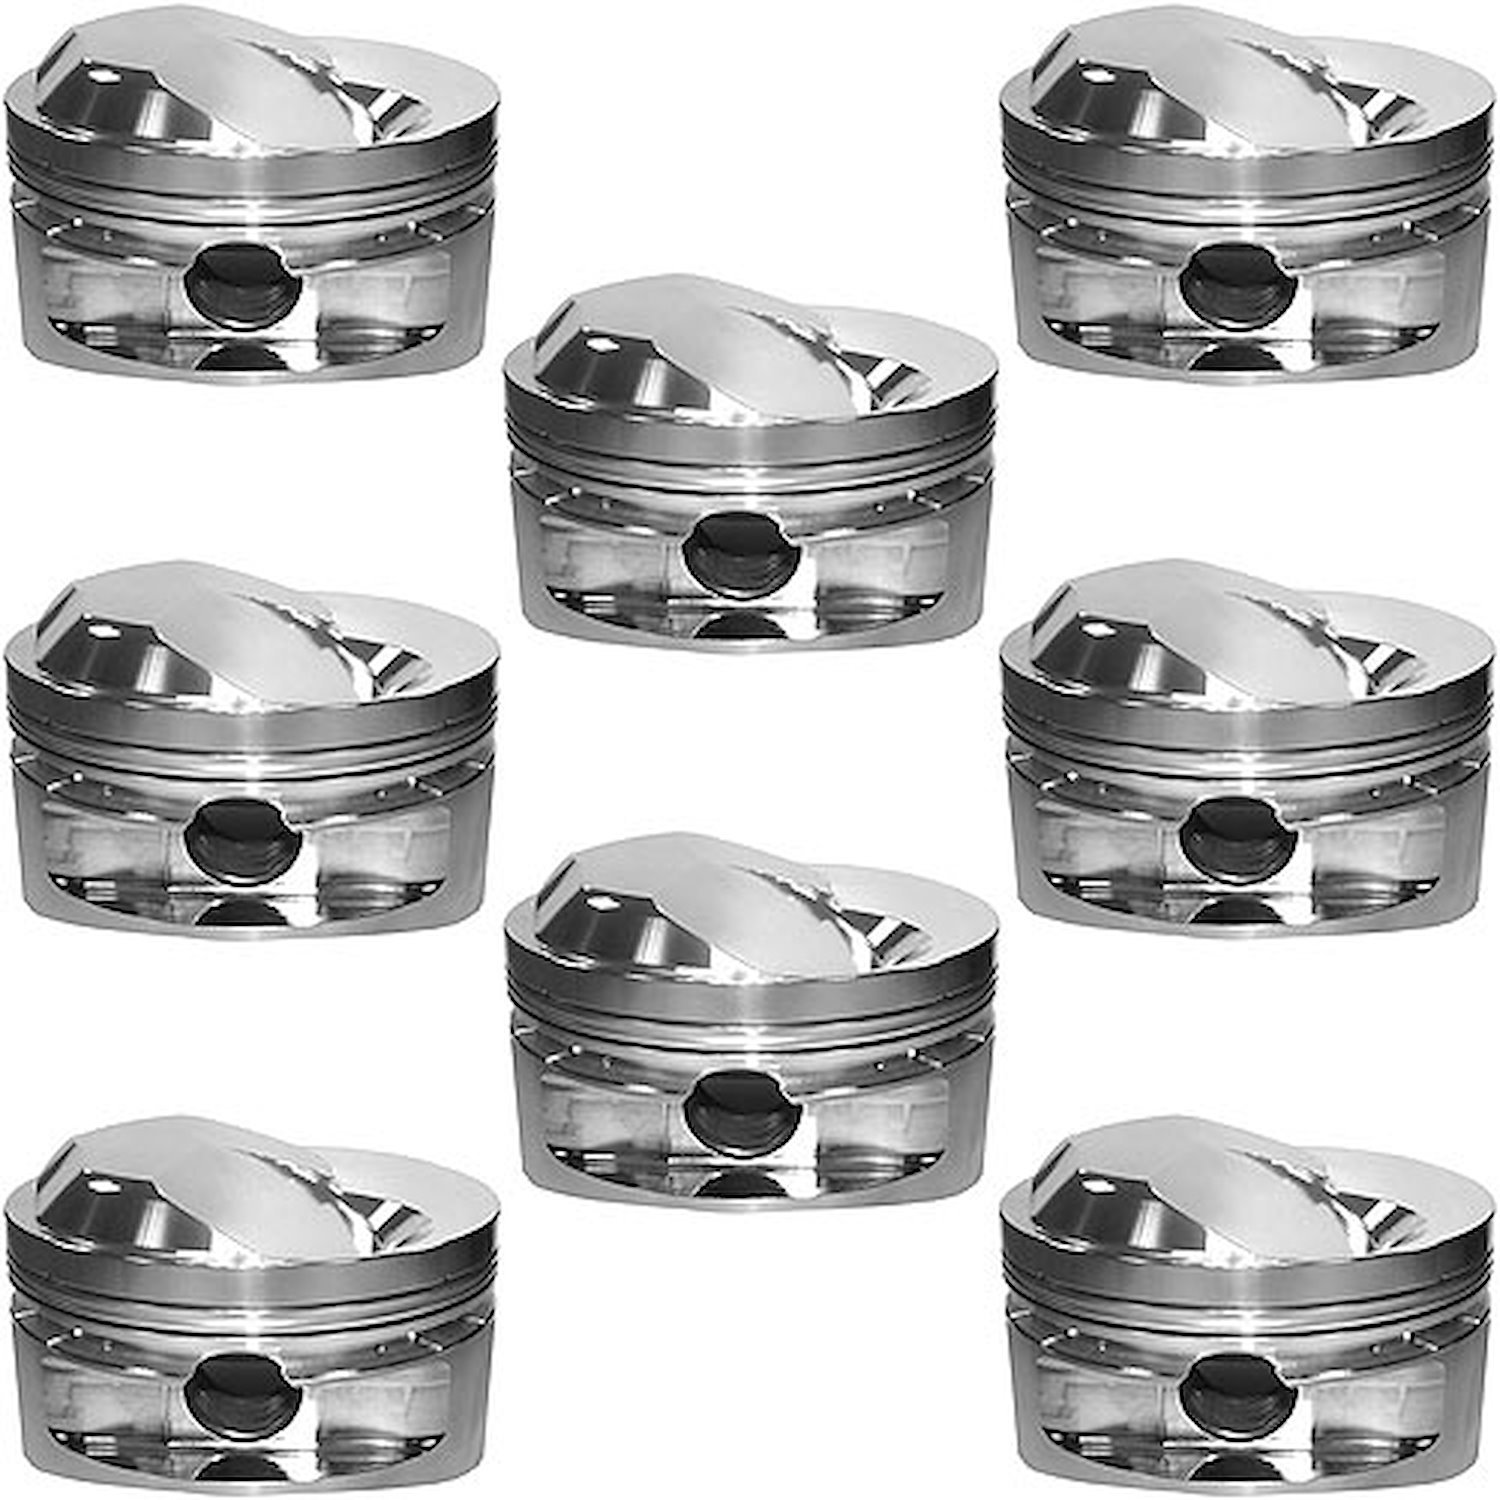 Big Block Chevy Hollow Dome Pistons 4.530" Bore (+.030" )